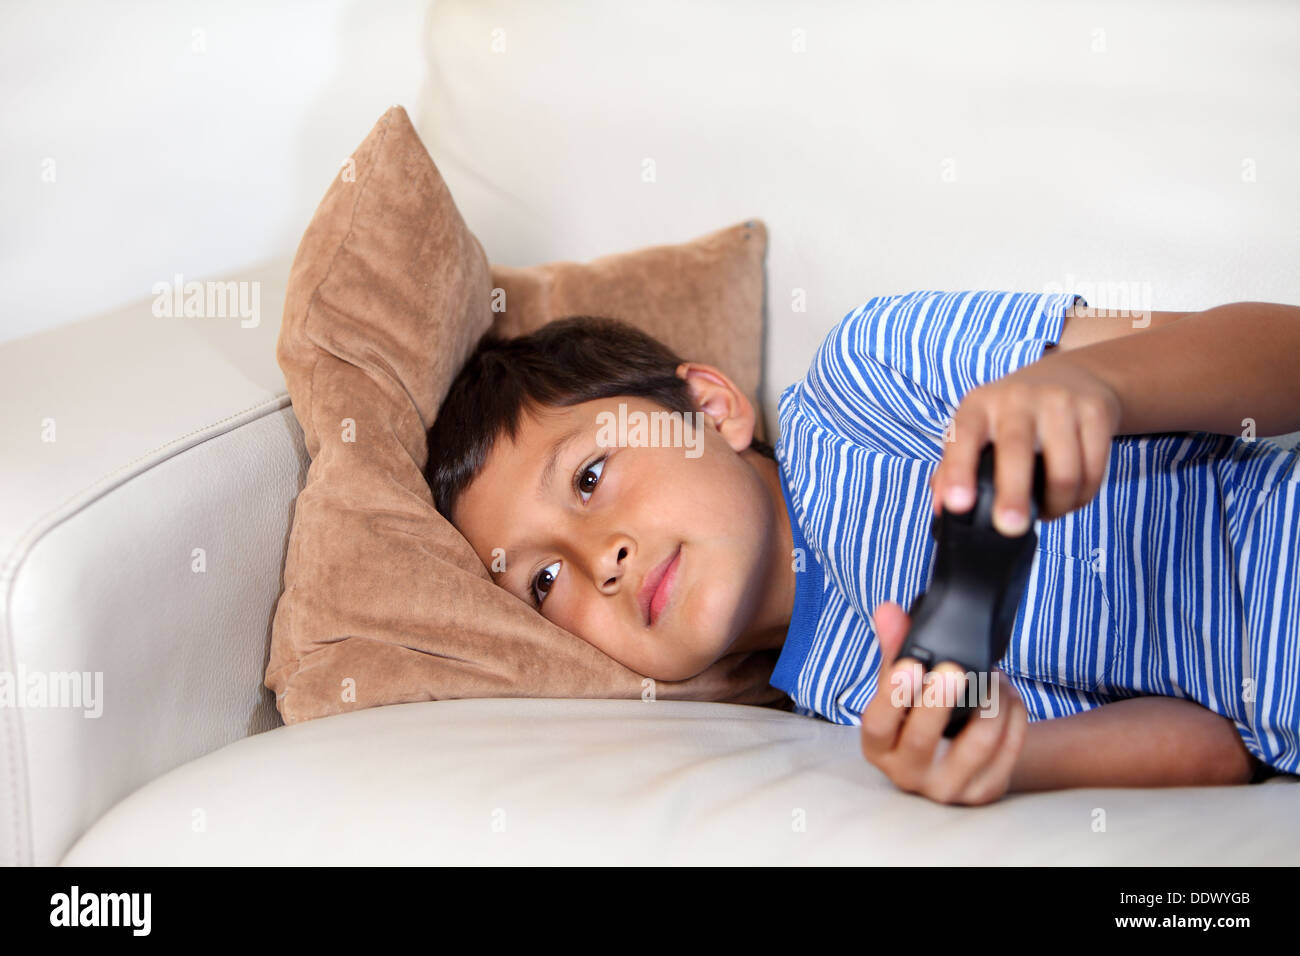 Young boy playing computer game while relxing on the sofa Stock Photo